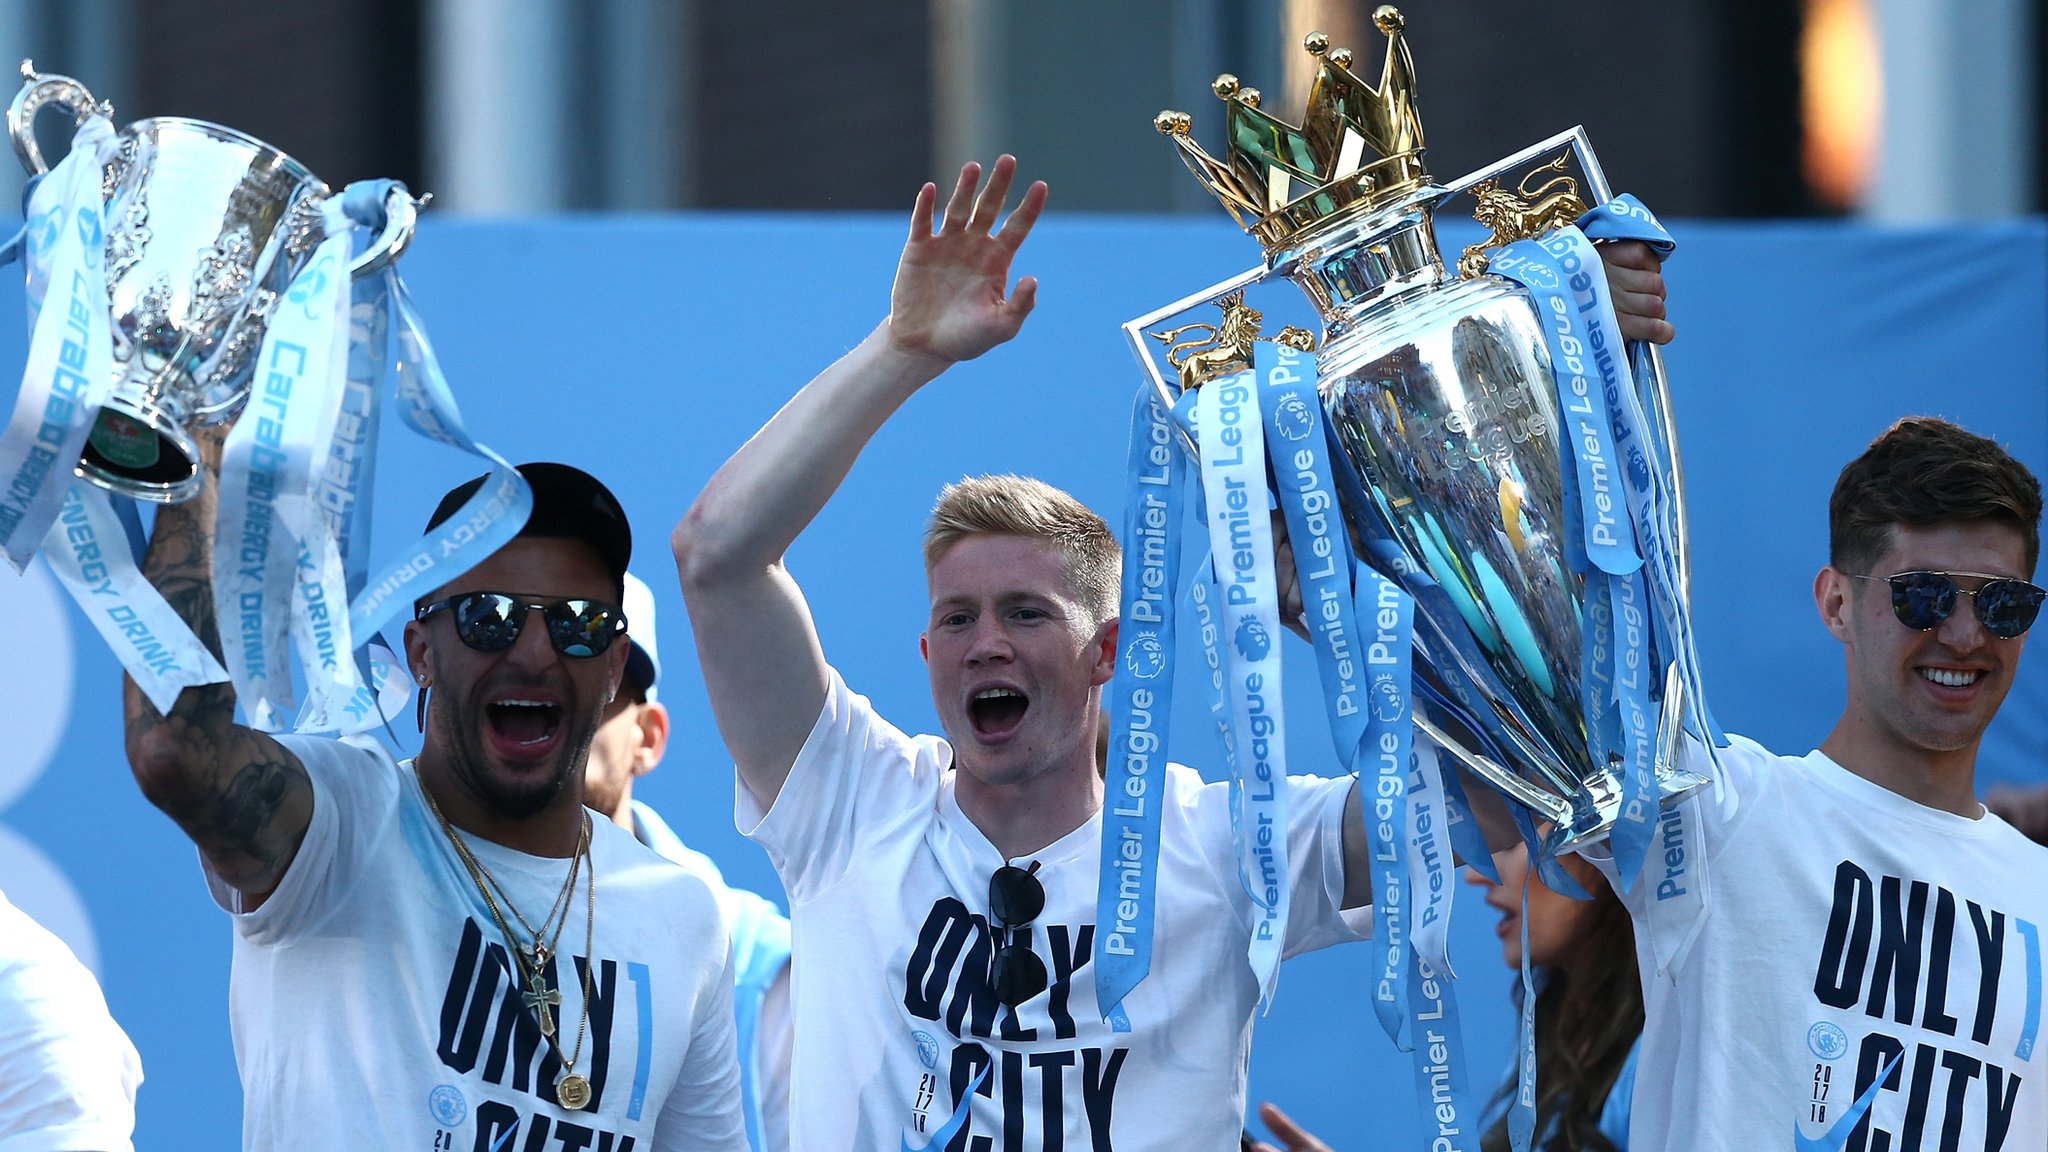 'Last year was almost perfect' - De Bruyne on winning the title, Guardiola & being a leader